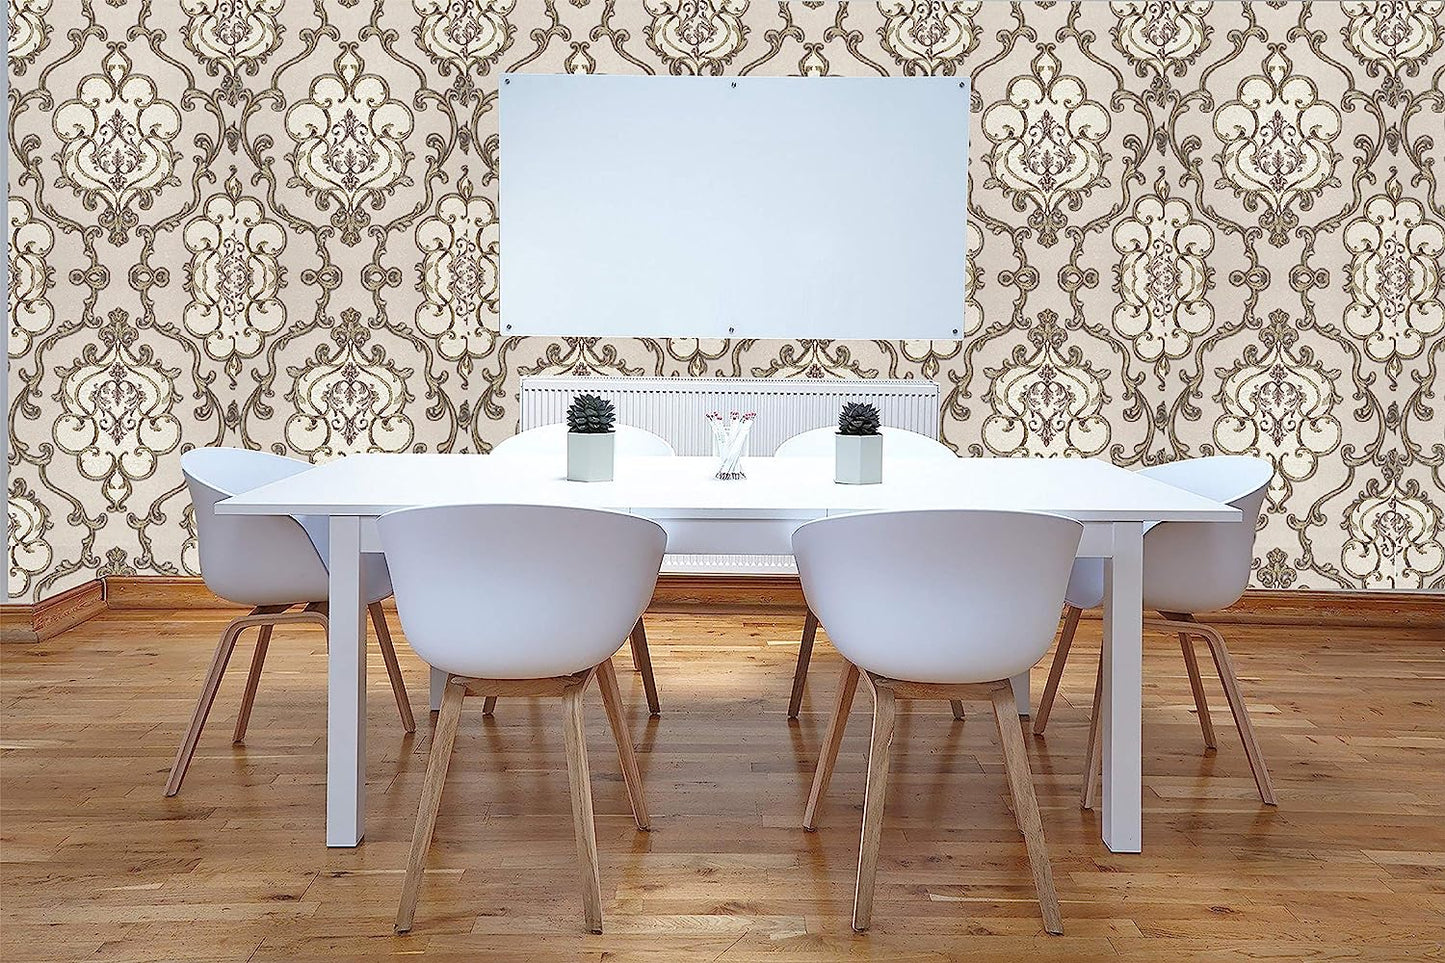 3D Latest Ivory Damask Design Brown Wallpaper Roll for Home Walls 57 Sq Ft (0.53m or 21 Inches x 10m or 33 Feet)